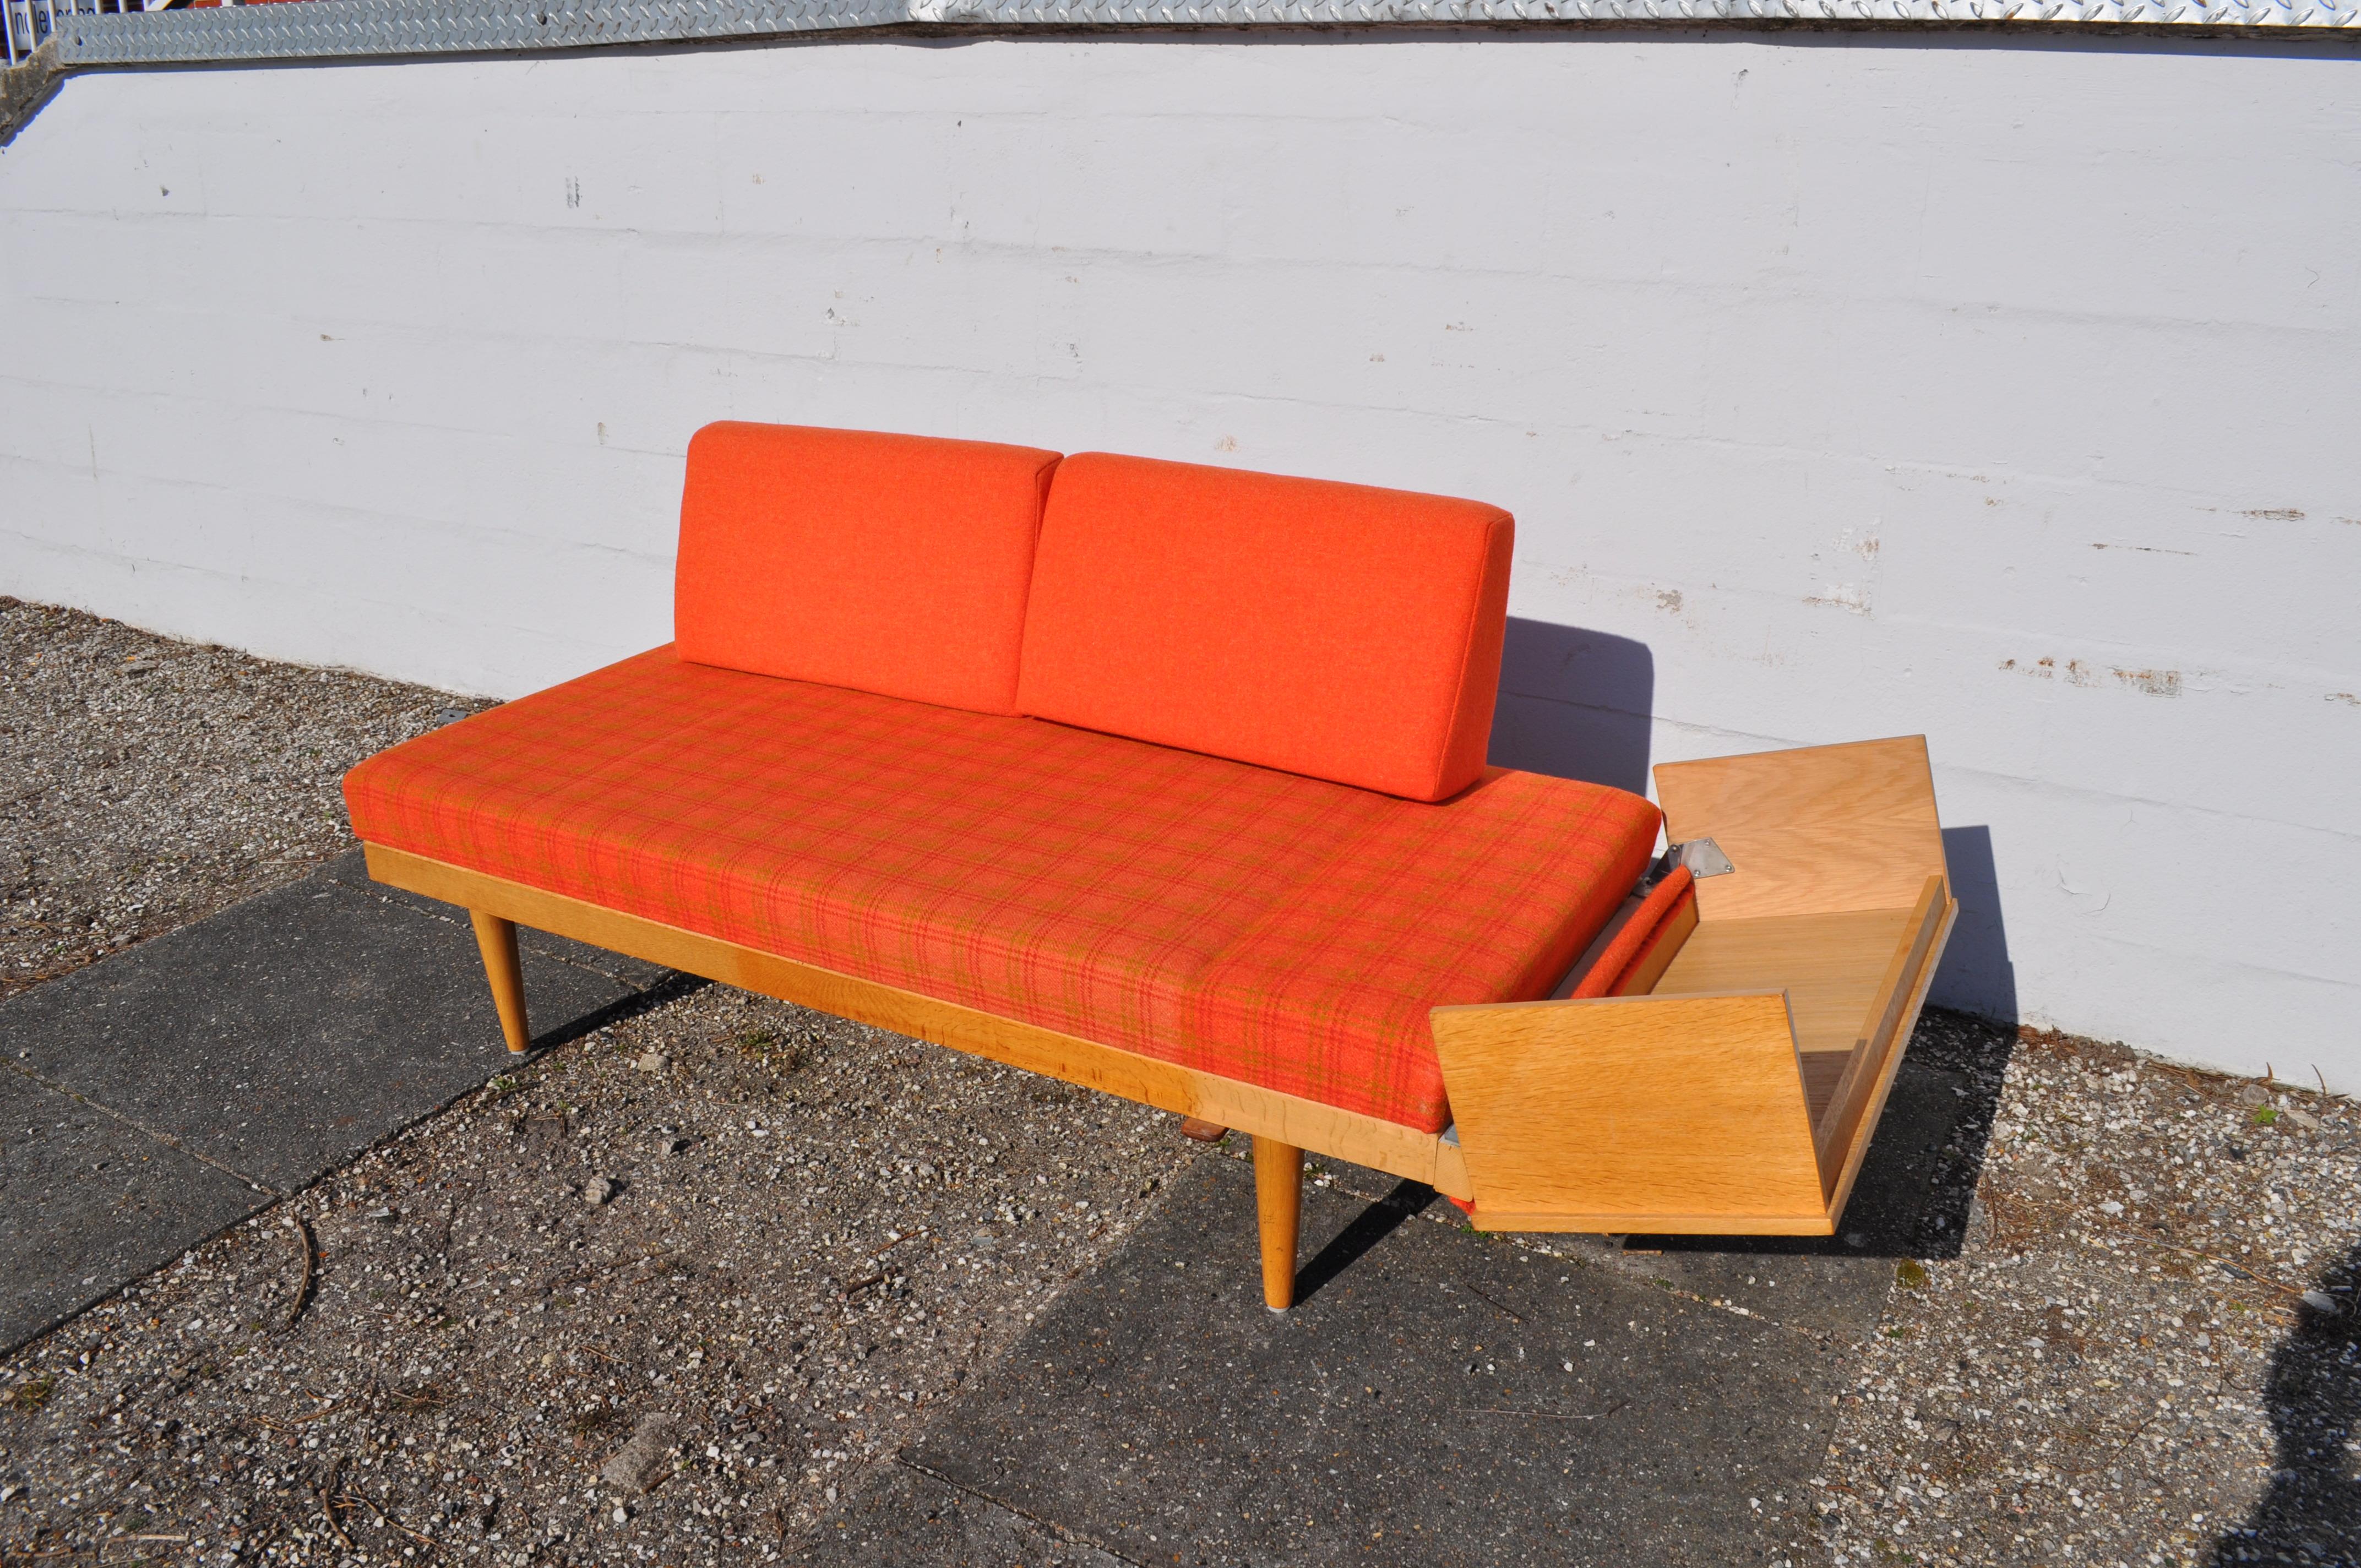 Ekornes Daybed designed by Ingmar Relling (Norway) for Swane, rust checkered patterned fabric. The tablet switches to put the pillow that becomes pillow, the seat is up to accommodate a duvet. A second is available to make the pair.